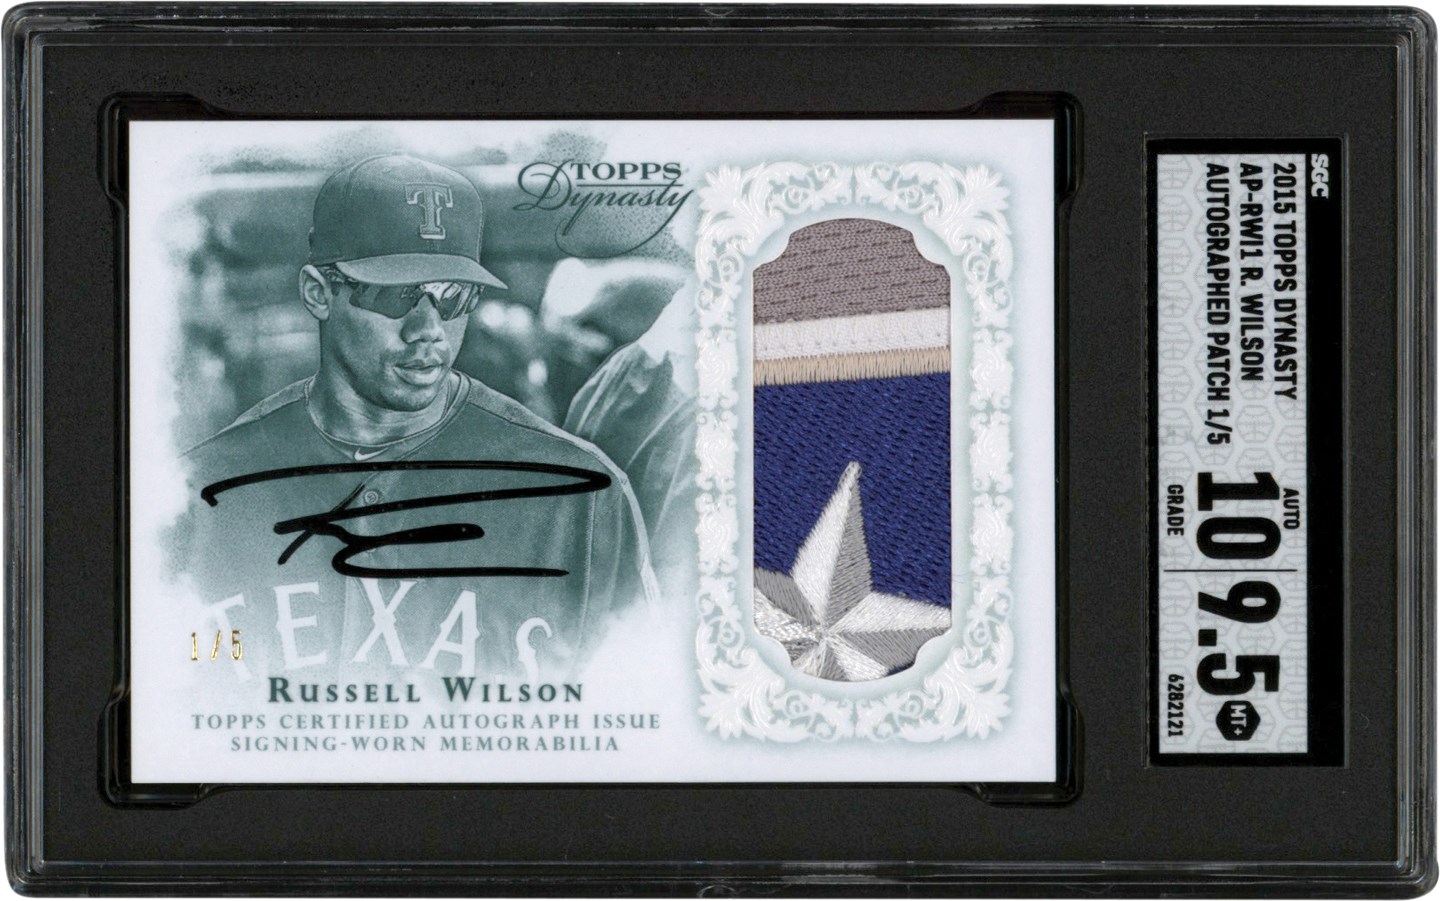 Modern Sports Cards - 015 Topps Dynasty Baseball Russell Wilson Autograph Patch Card #1/5 SGC MINT+ 9.5 Auto 10 (Pop 1 of 1 - Highest Graded)